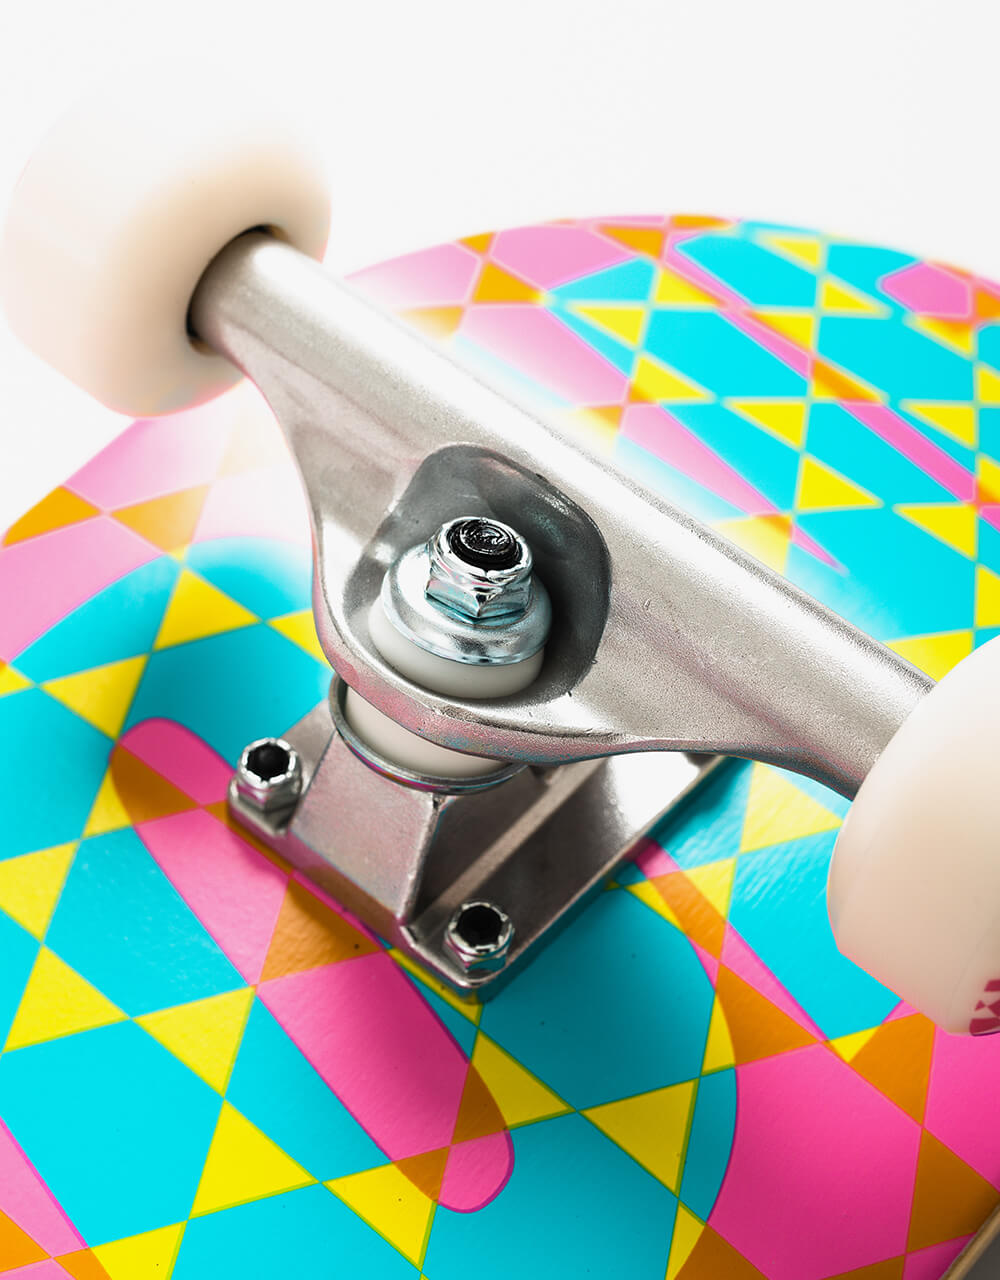 Route One Geometric Complete Skateboard - 7.75"